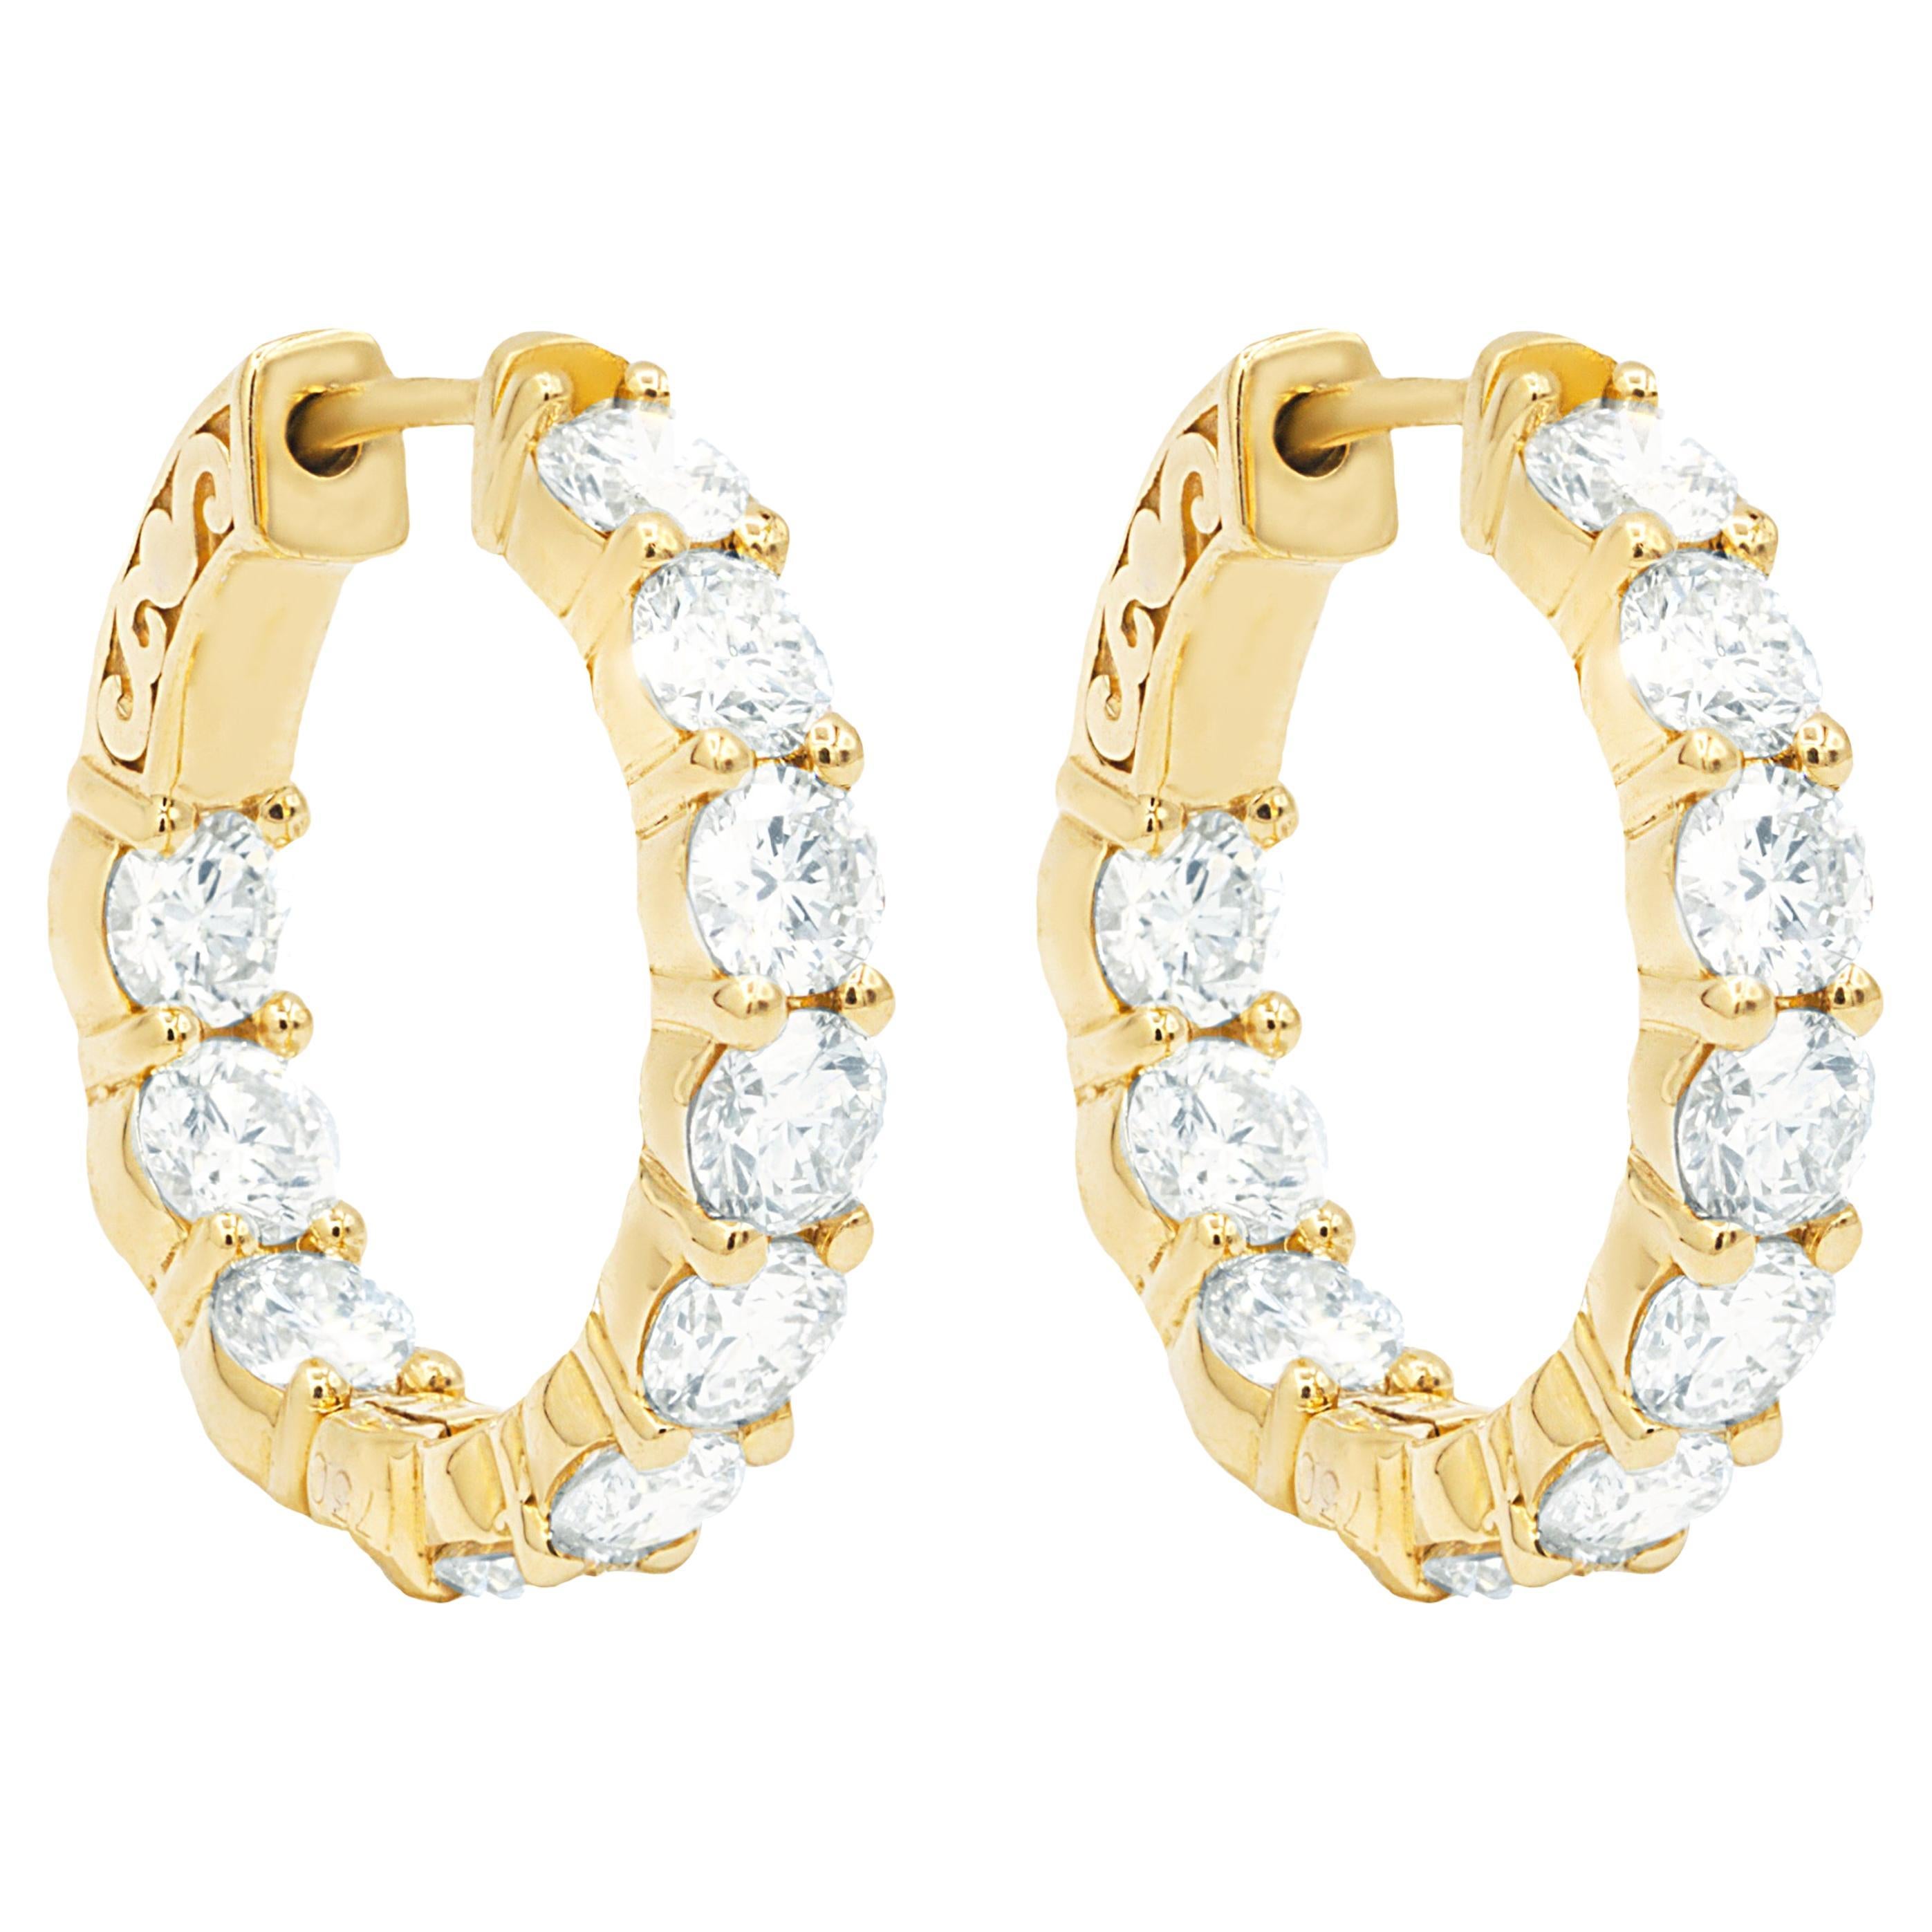 Diana M. 18 kt yellow gold inside-out hoop earrings adorned with 4.05 cts  For Sale